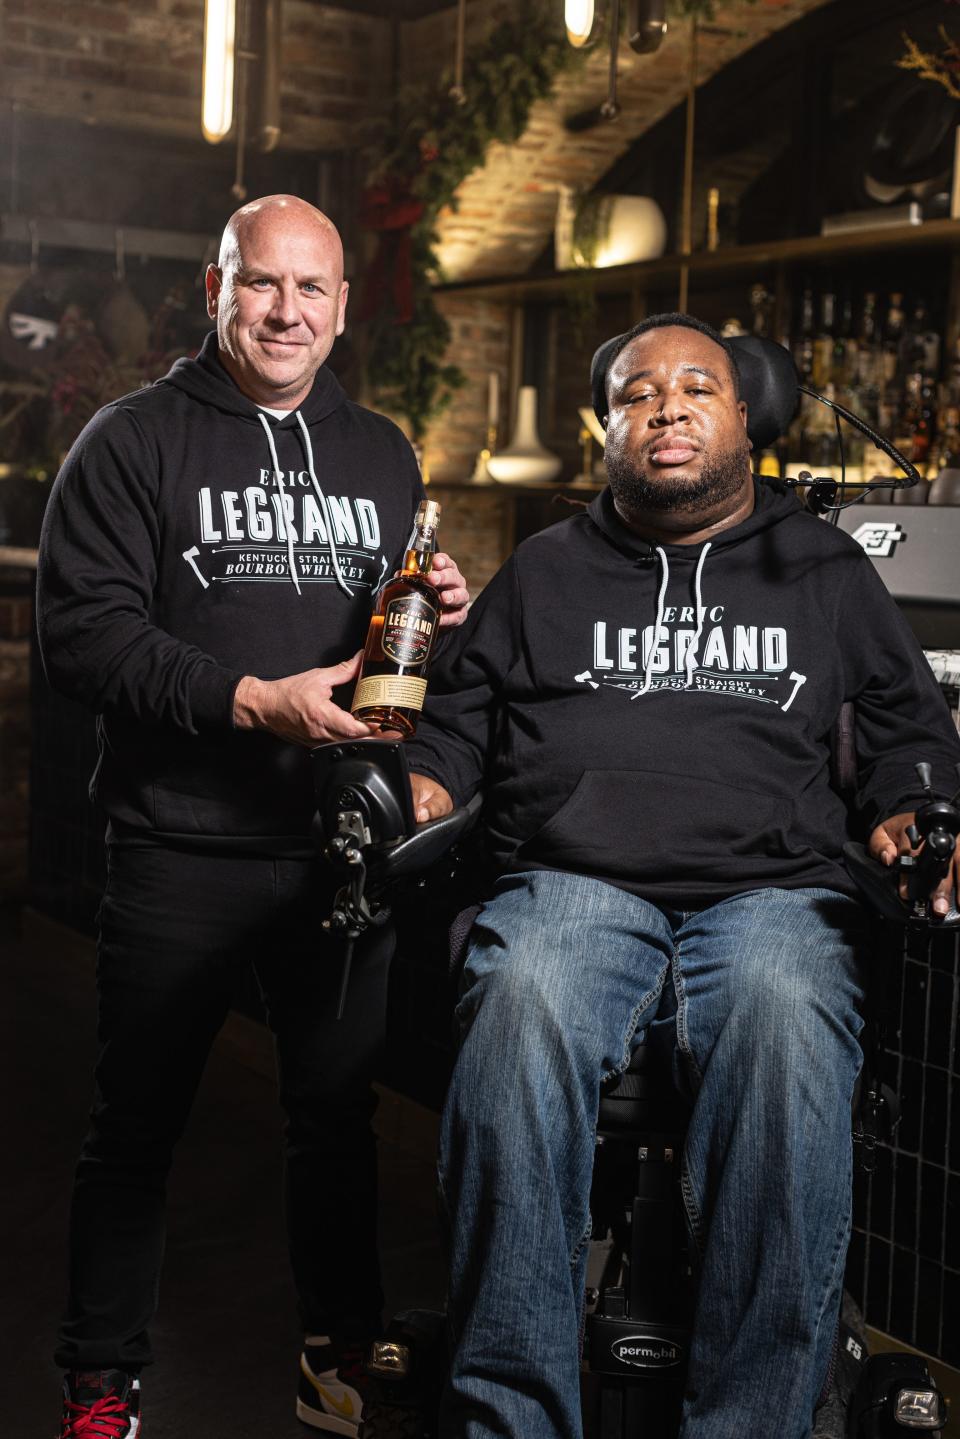 Eric LeGrand co-founded the whiskey with Brian Axelrod, who has worked on the distribution and commercial side of some the most iconic spirits labels in the world.